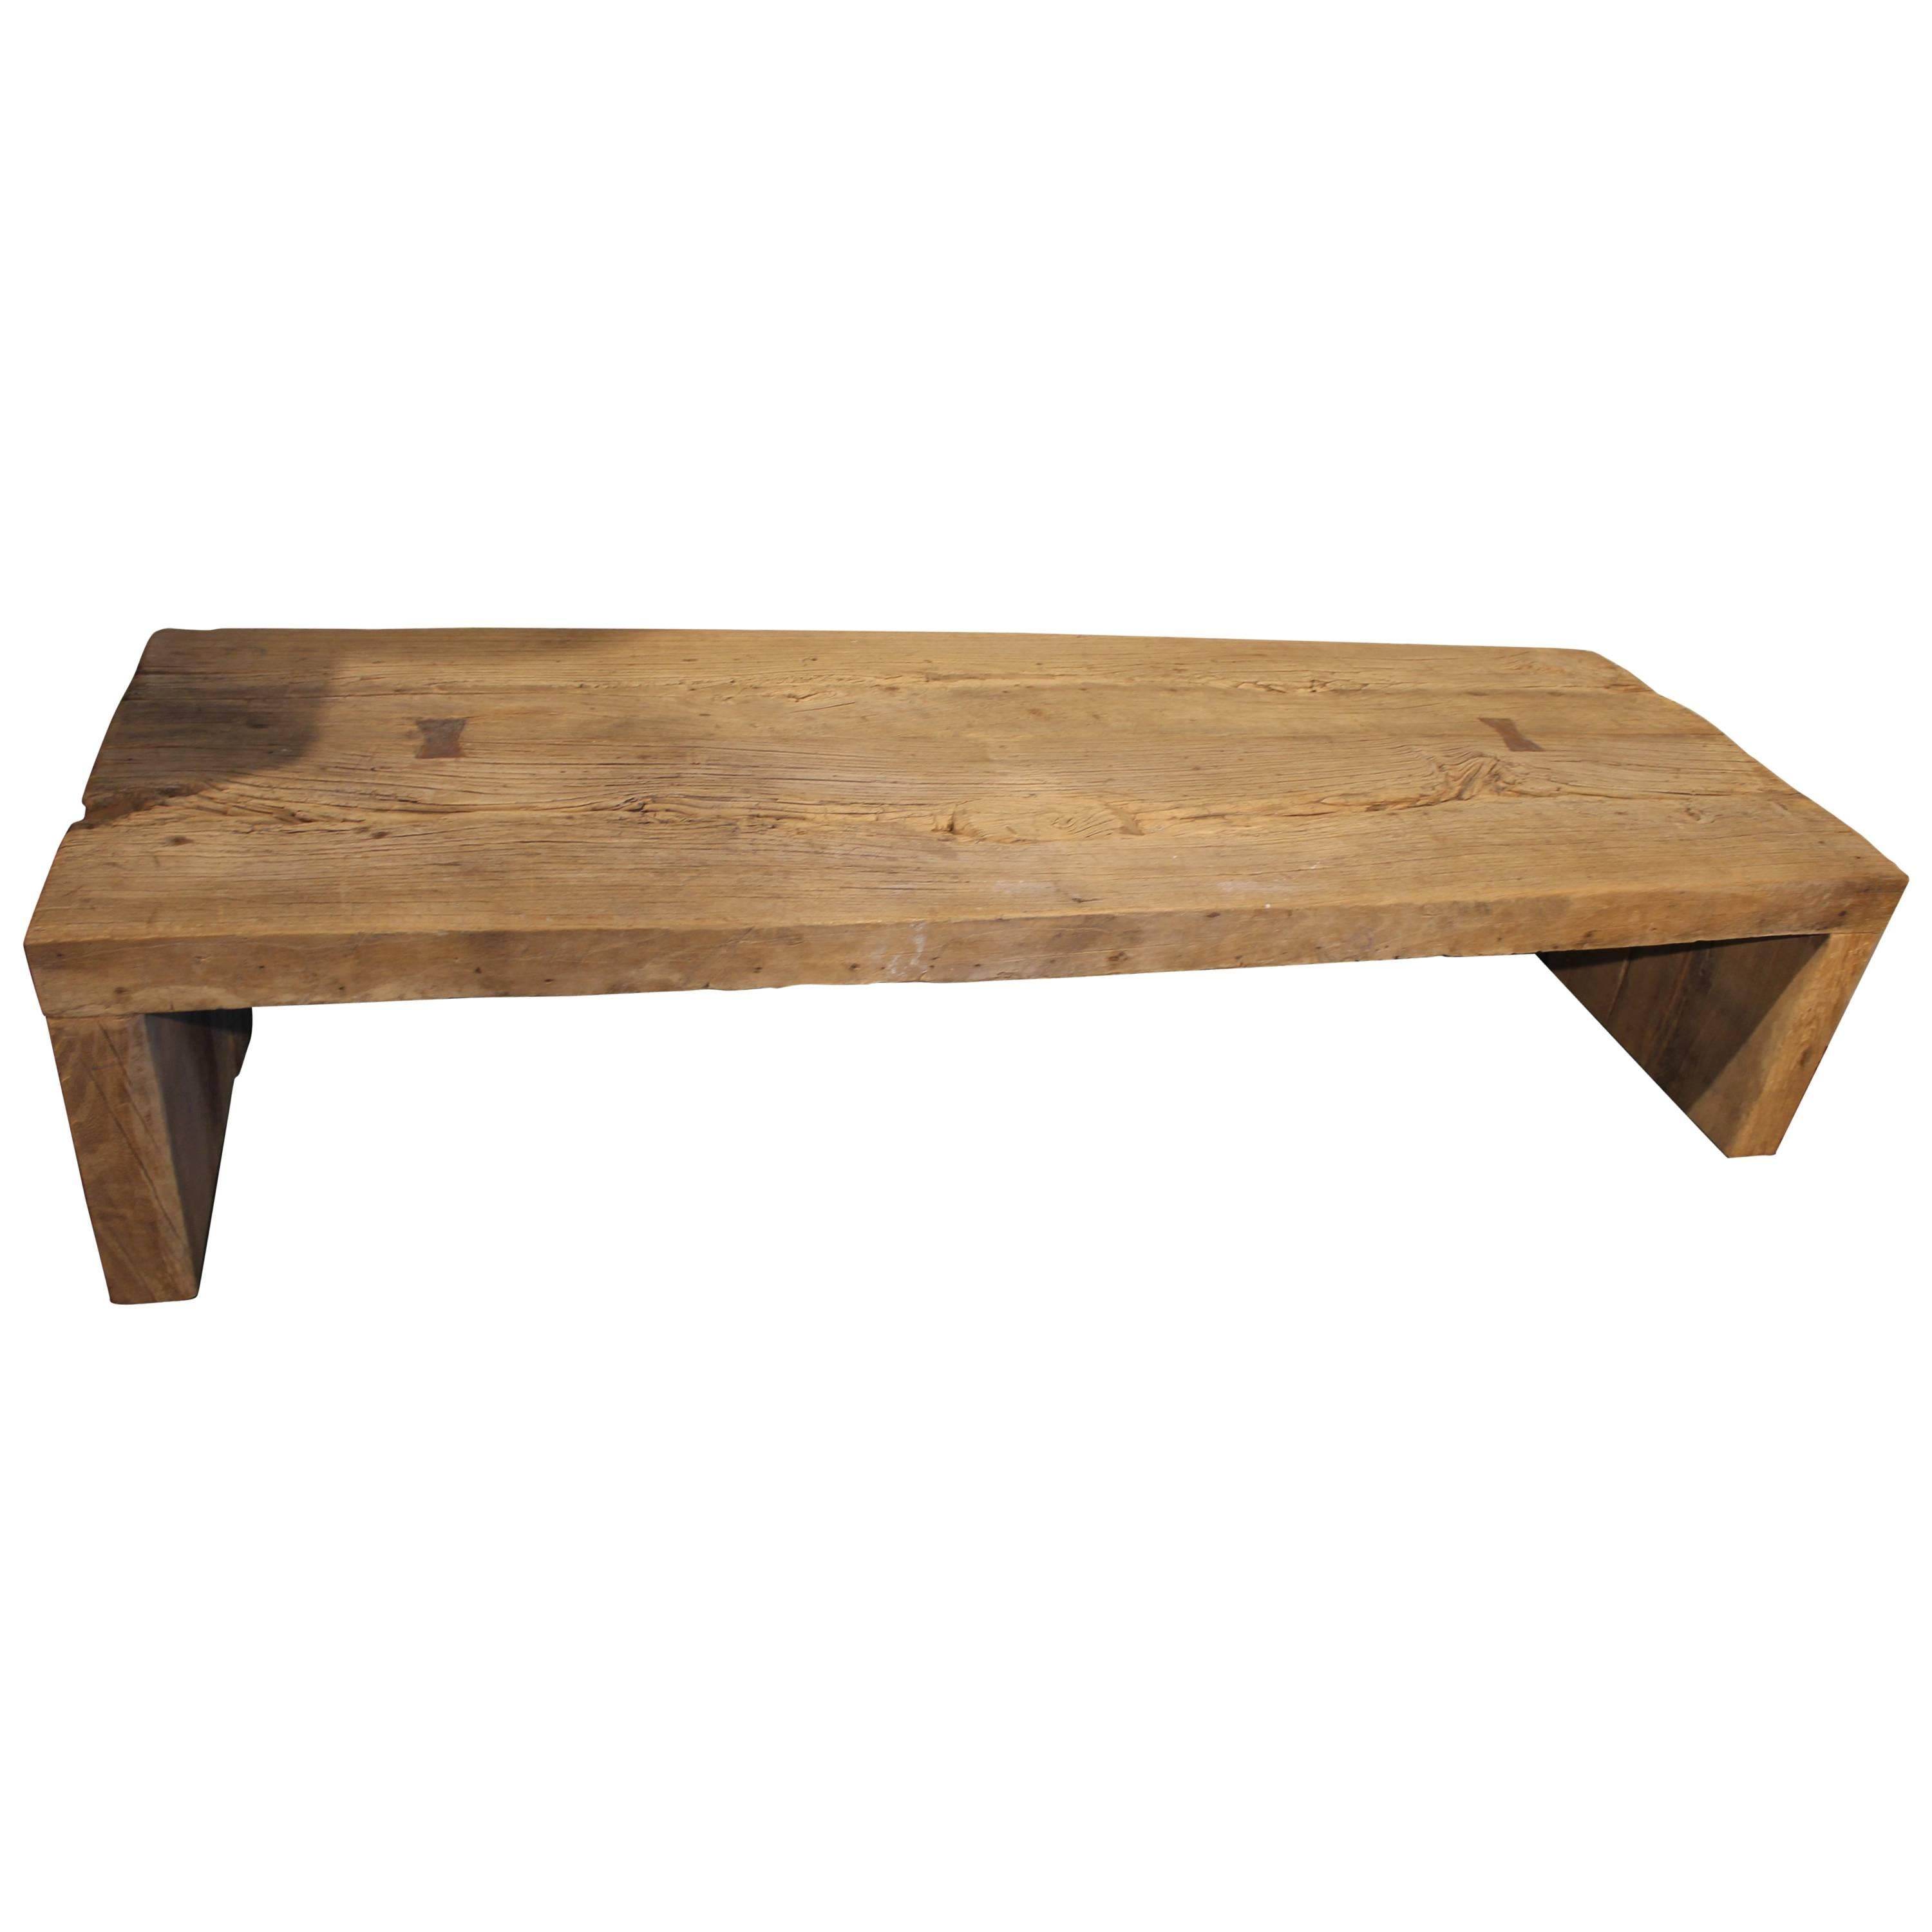 Coffee Table in the Wabi Sabi Aesthetic, Made from Reclaimed Elm